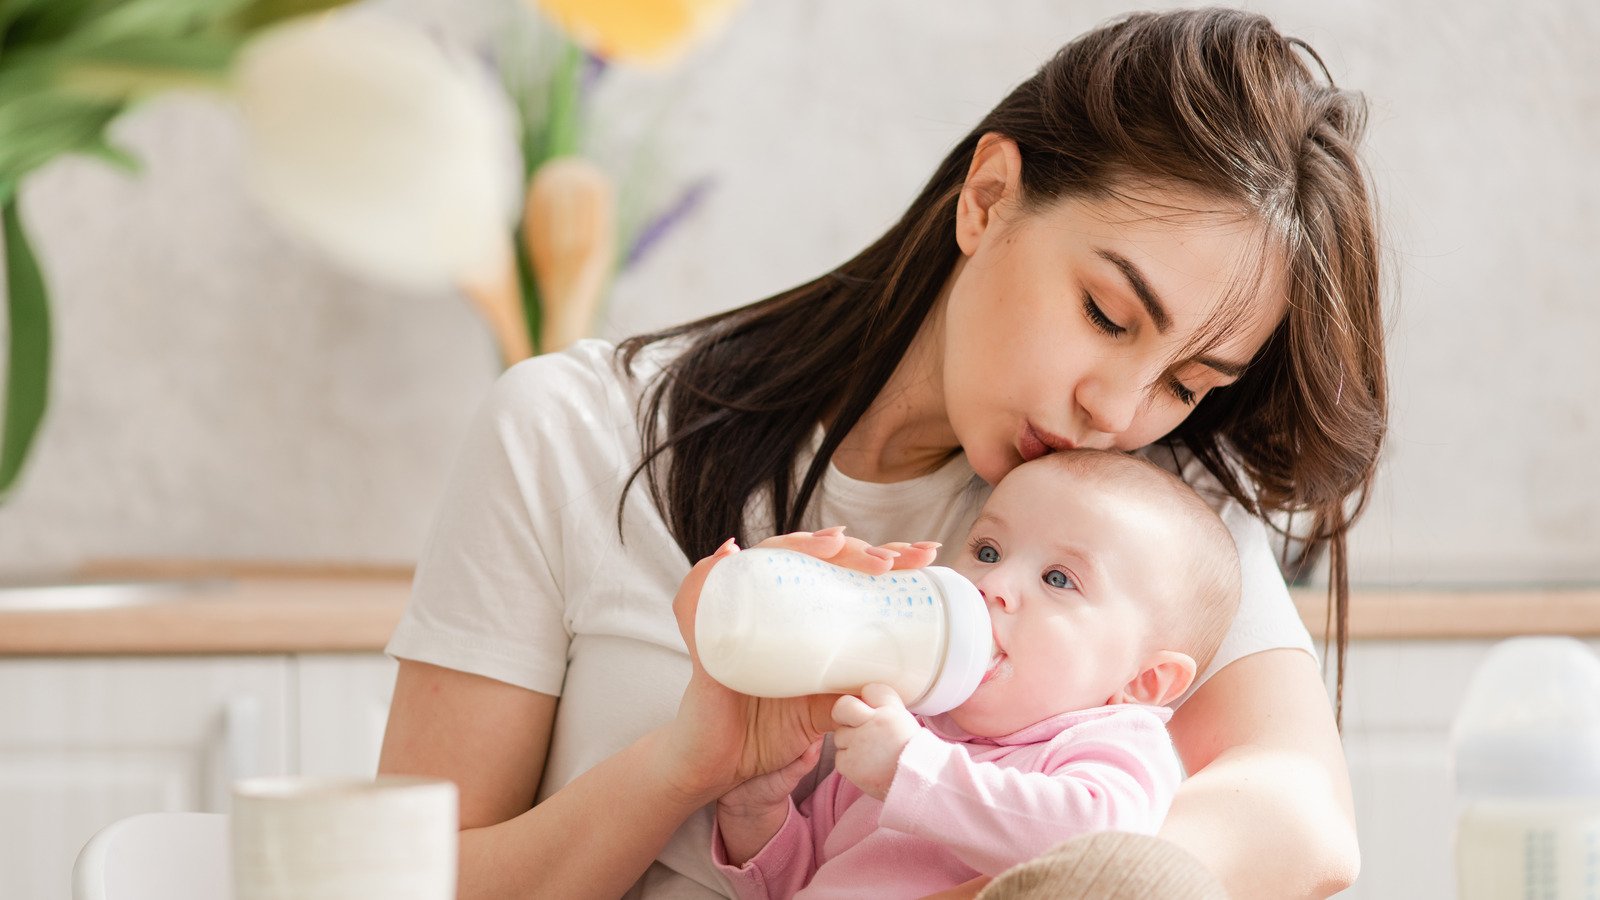 The Real Reason Not Everyone Can Breastfeed - Health Digest